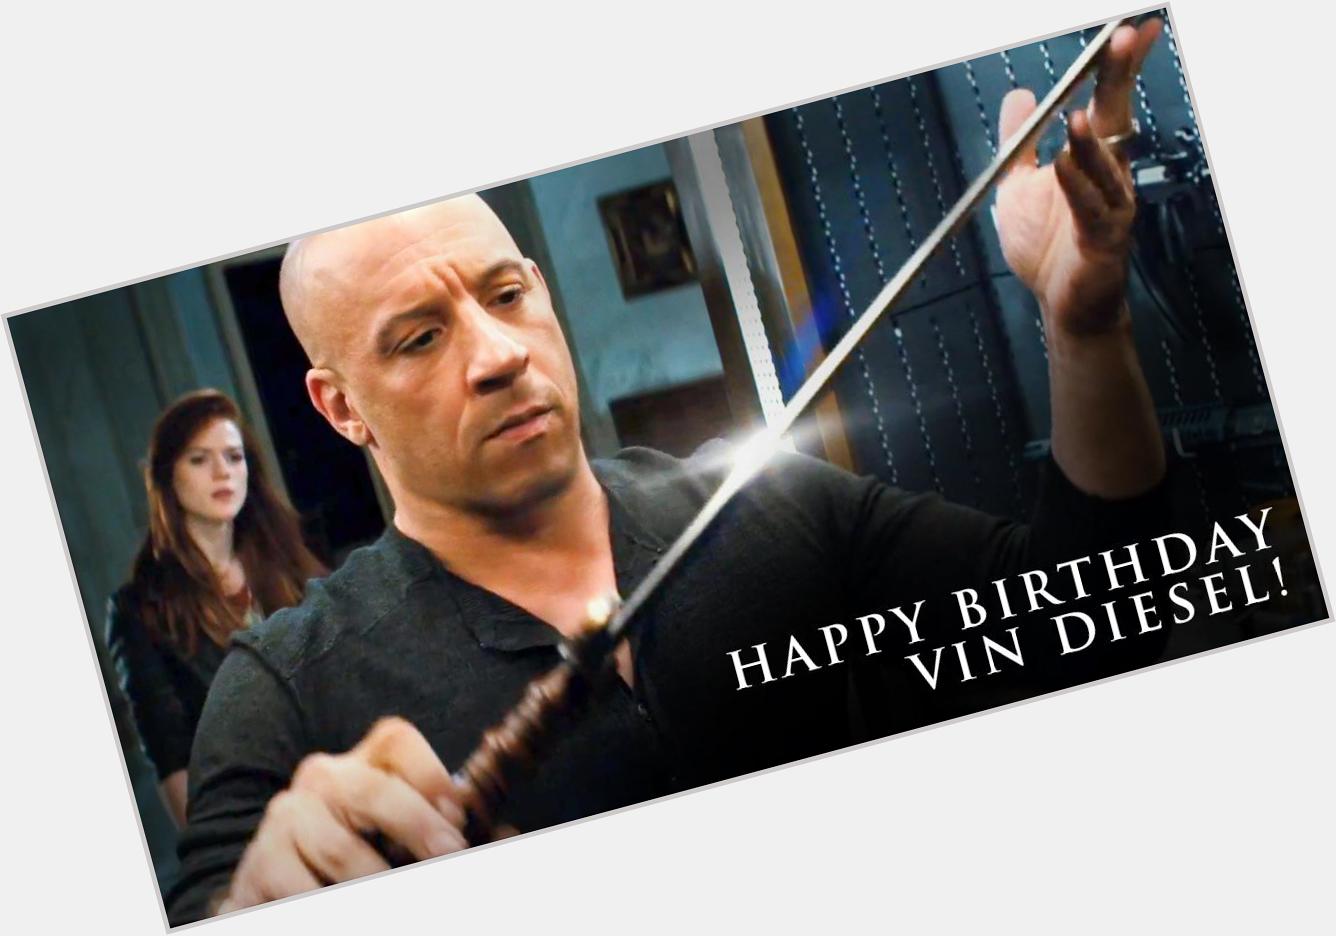 A Happy Birthday goes out to the talented Vin Diesel! Catch him in action on October 23 in 